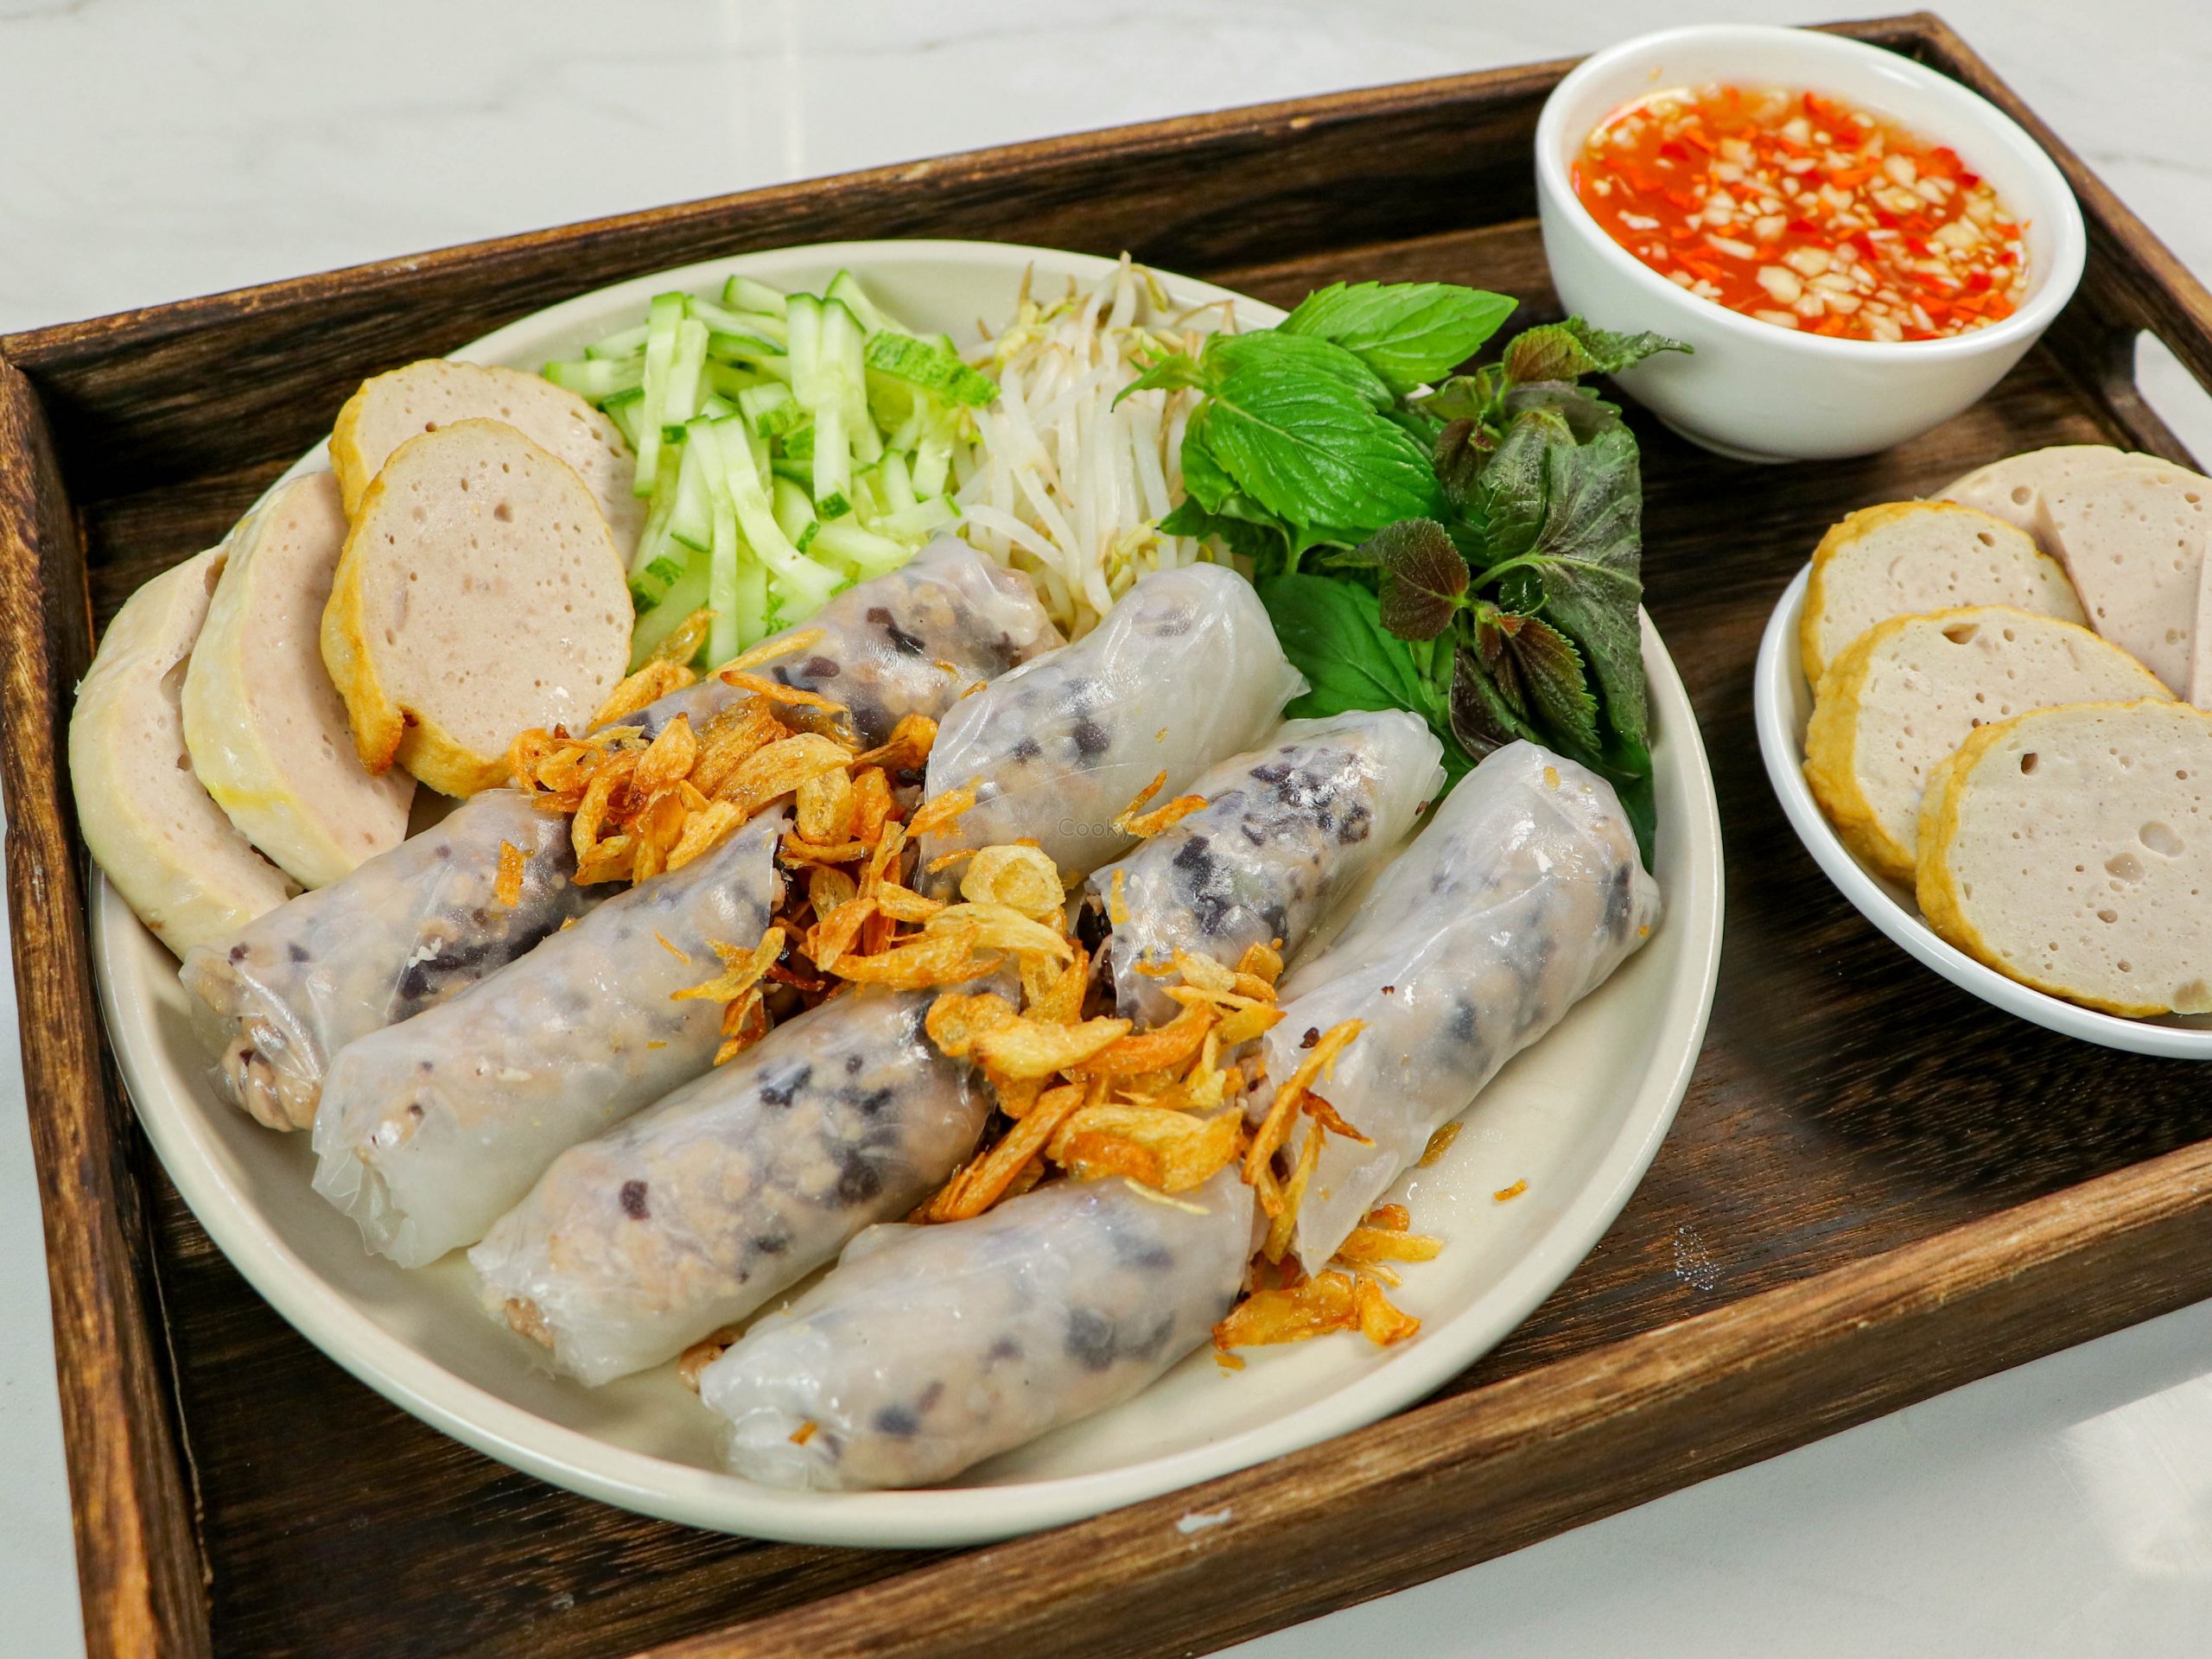 Top 20 must-try dishes in Ho Chi Minh City: Banh uot, Banh cuon - Steamed rice pancake stuffed with minced pork